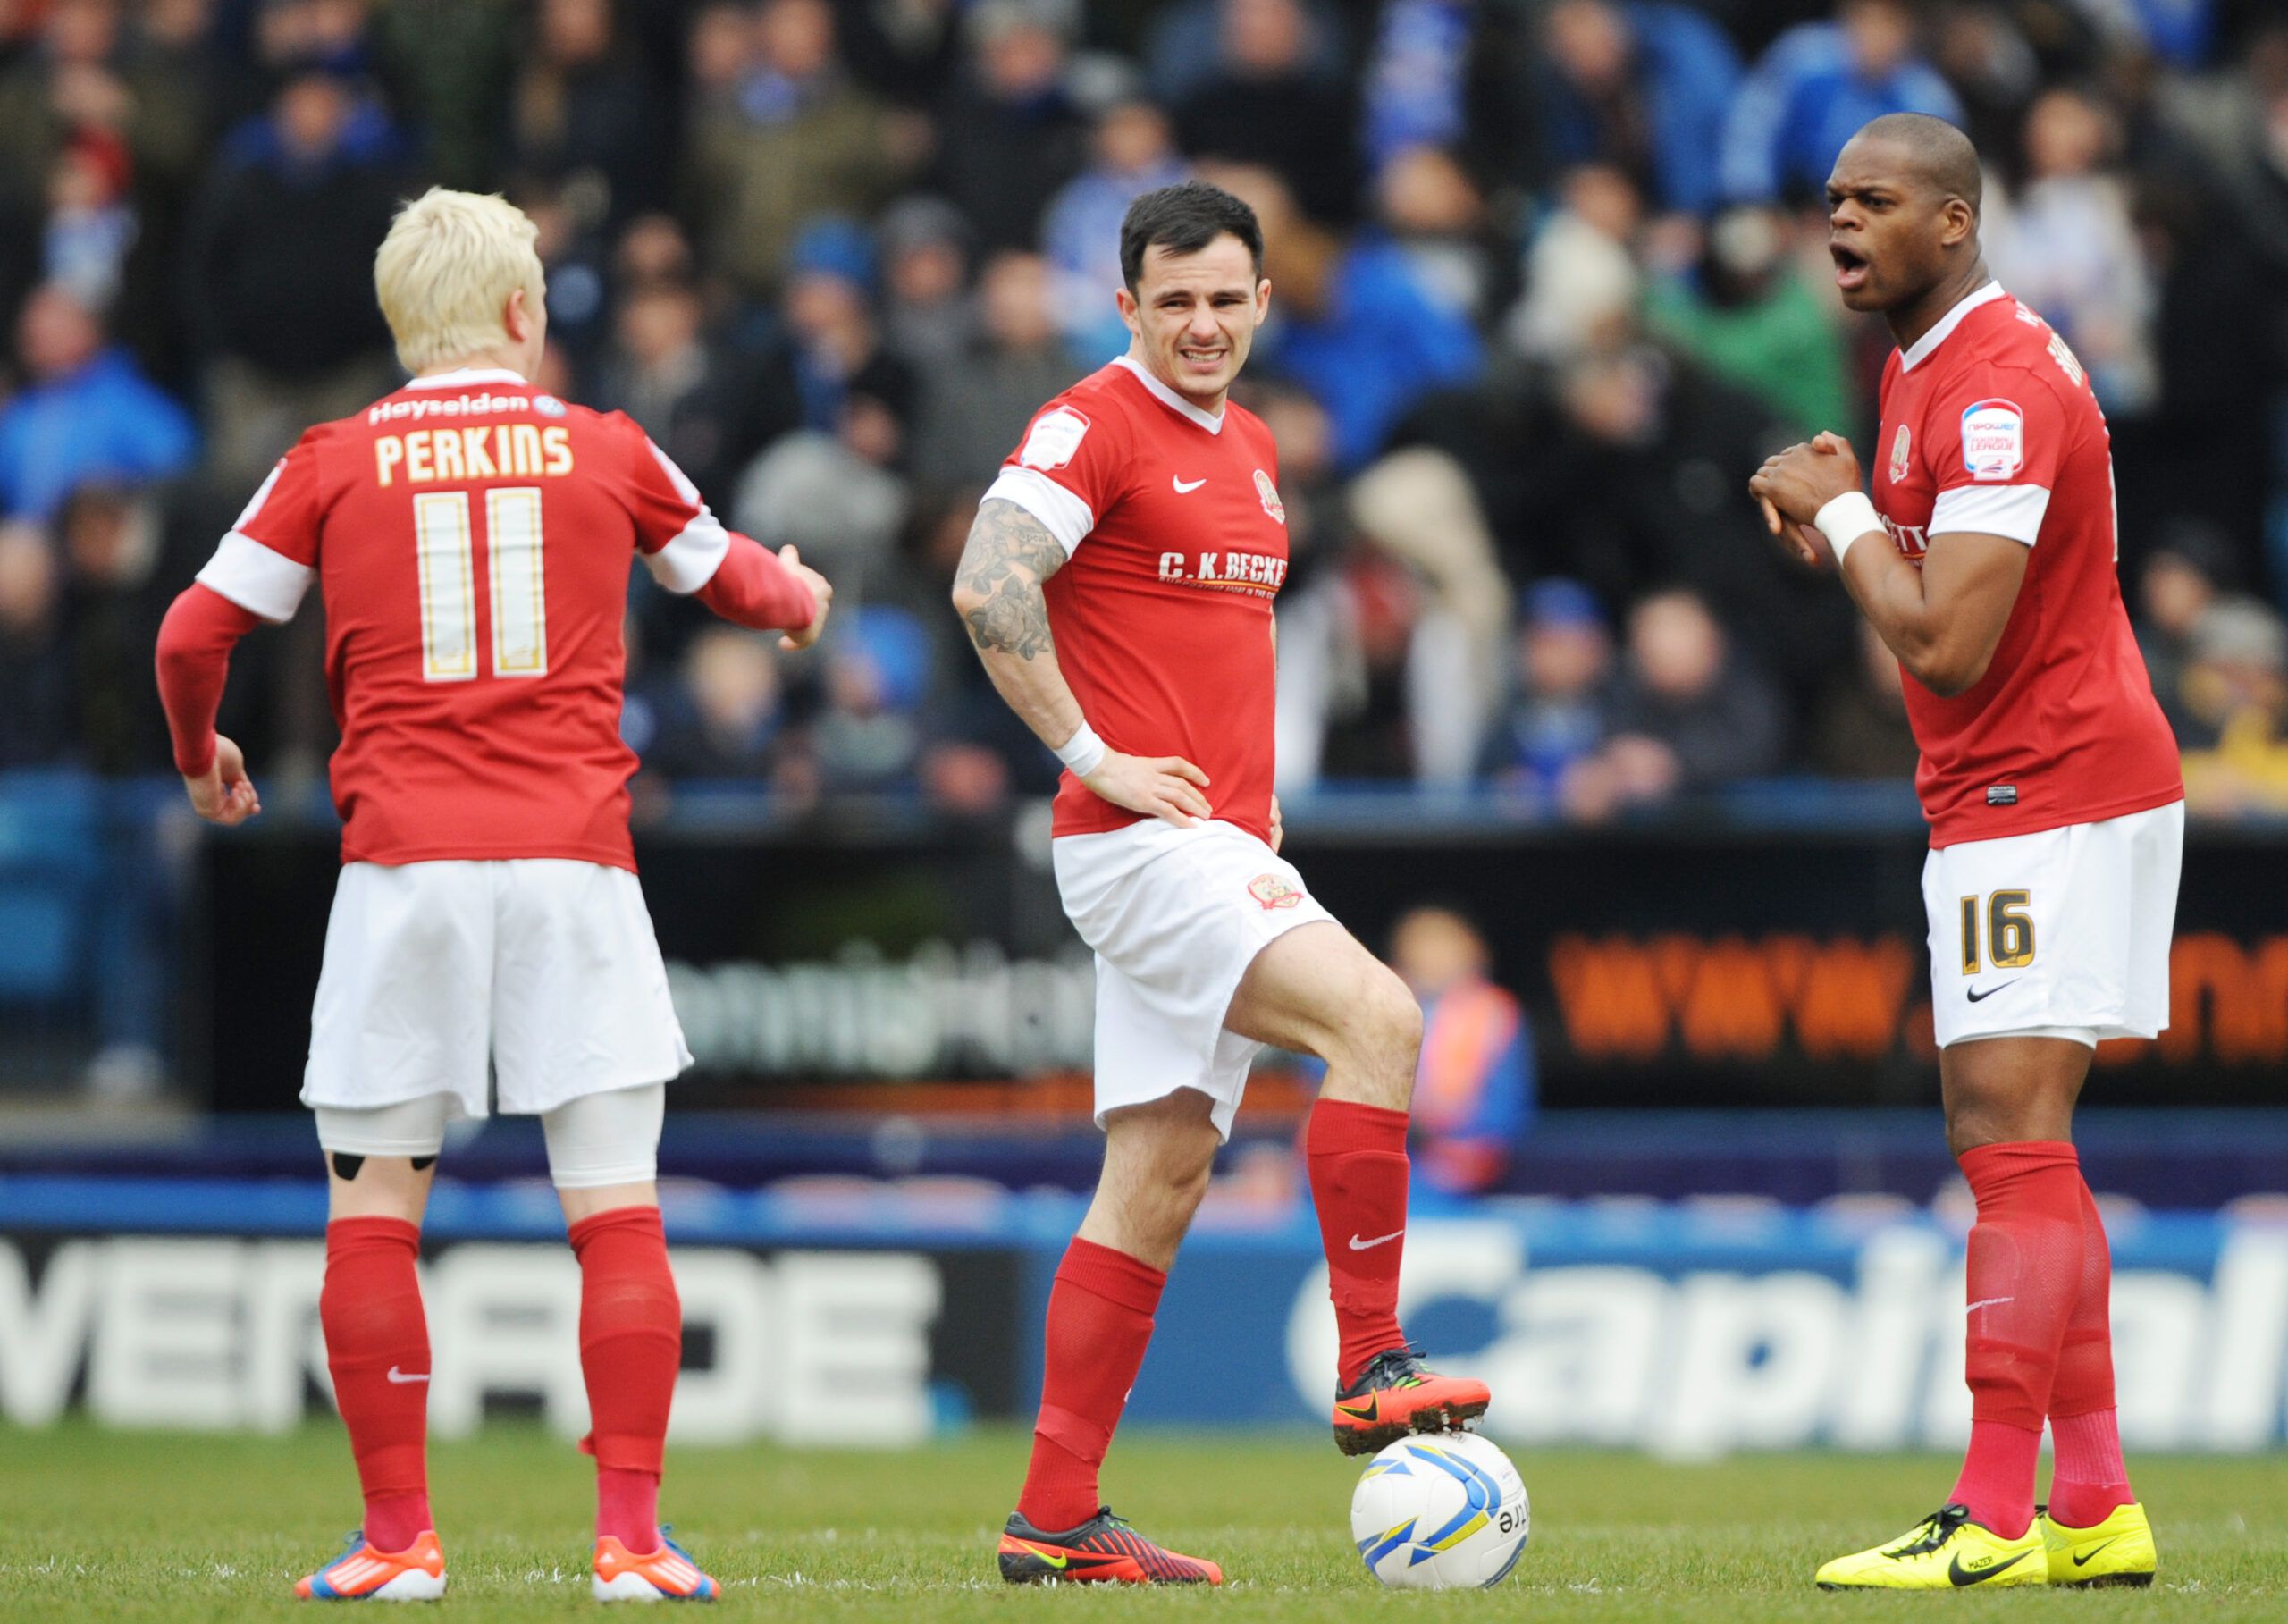 Football - Sheffield Wednesday v Barnsley - npower Football League Championship - Hillsborough - 12/13 - 30/3/13 
(L-R) Barnsley's David Perkins, Chris Dagnall and Marlon Harewood prepare to kick off 
Mandatory Credit: Action Images / John Rushworth 
EDITORIAL USE ONLY. No use with unauthorized audio, video, data, fixture lists, club/league logos or live services. Online in-match use limited to 45 images, no video emulation. No usex in betting, games or single club/league/player publications.  P